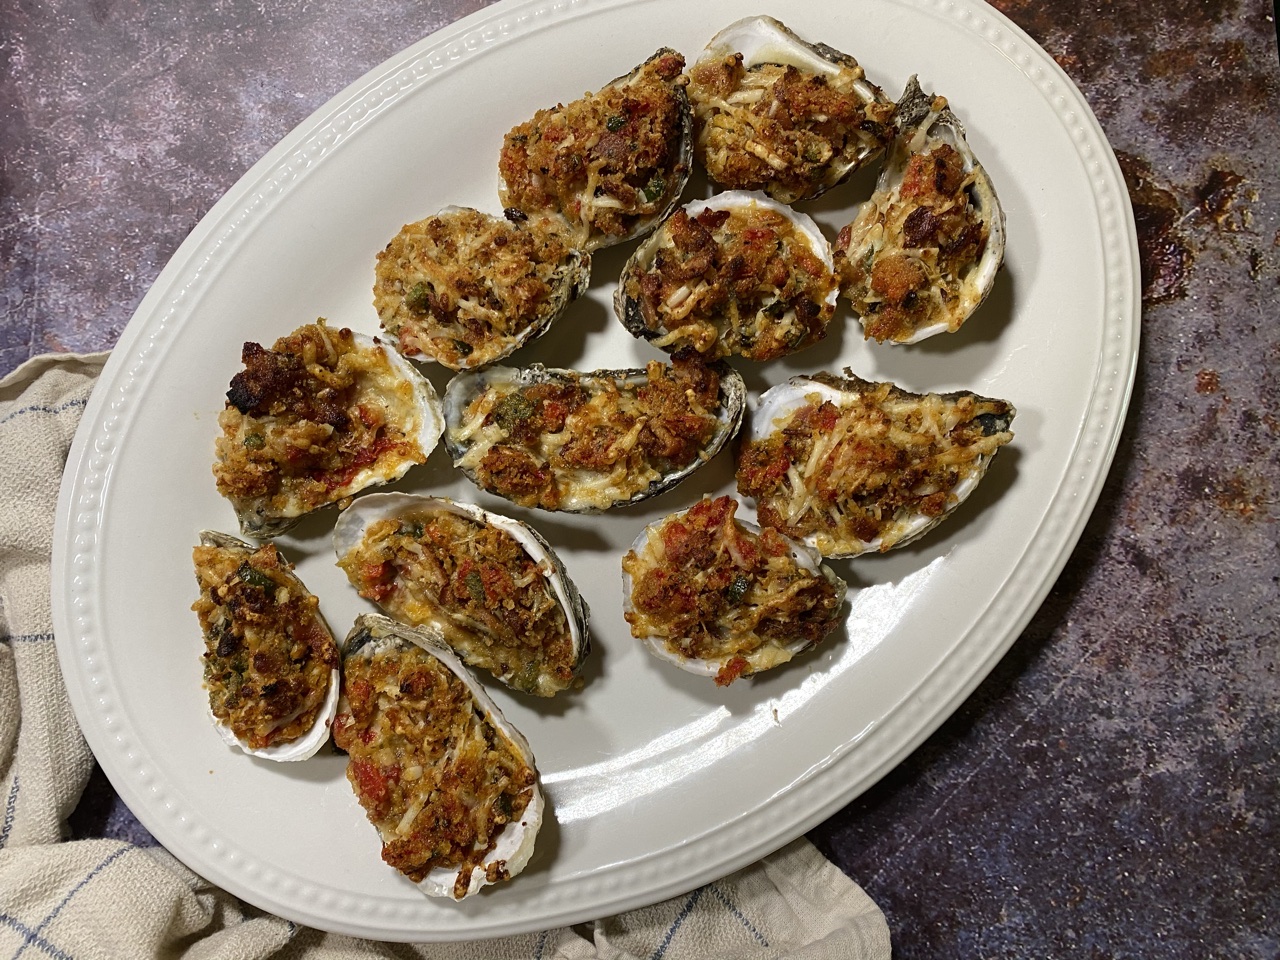 08CD5D2F 33FF 4E4F 9883 398F9591B9EF - Sorry Charlie’s Copycat Casino Baked Oysters with Savory Macaroni & Cheese